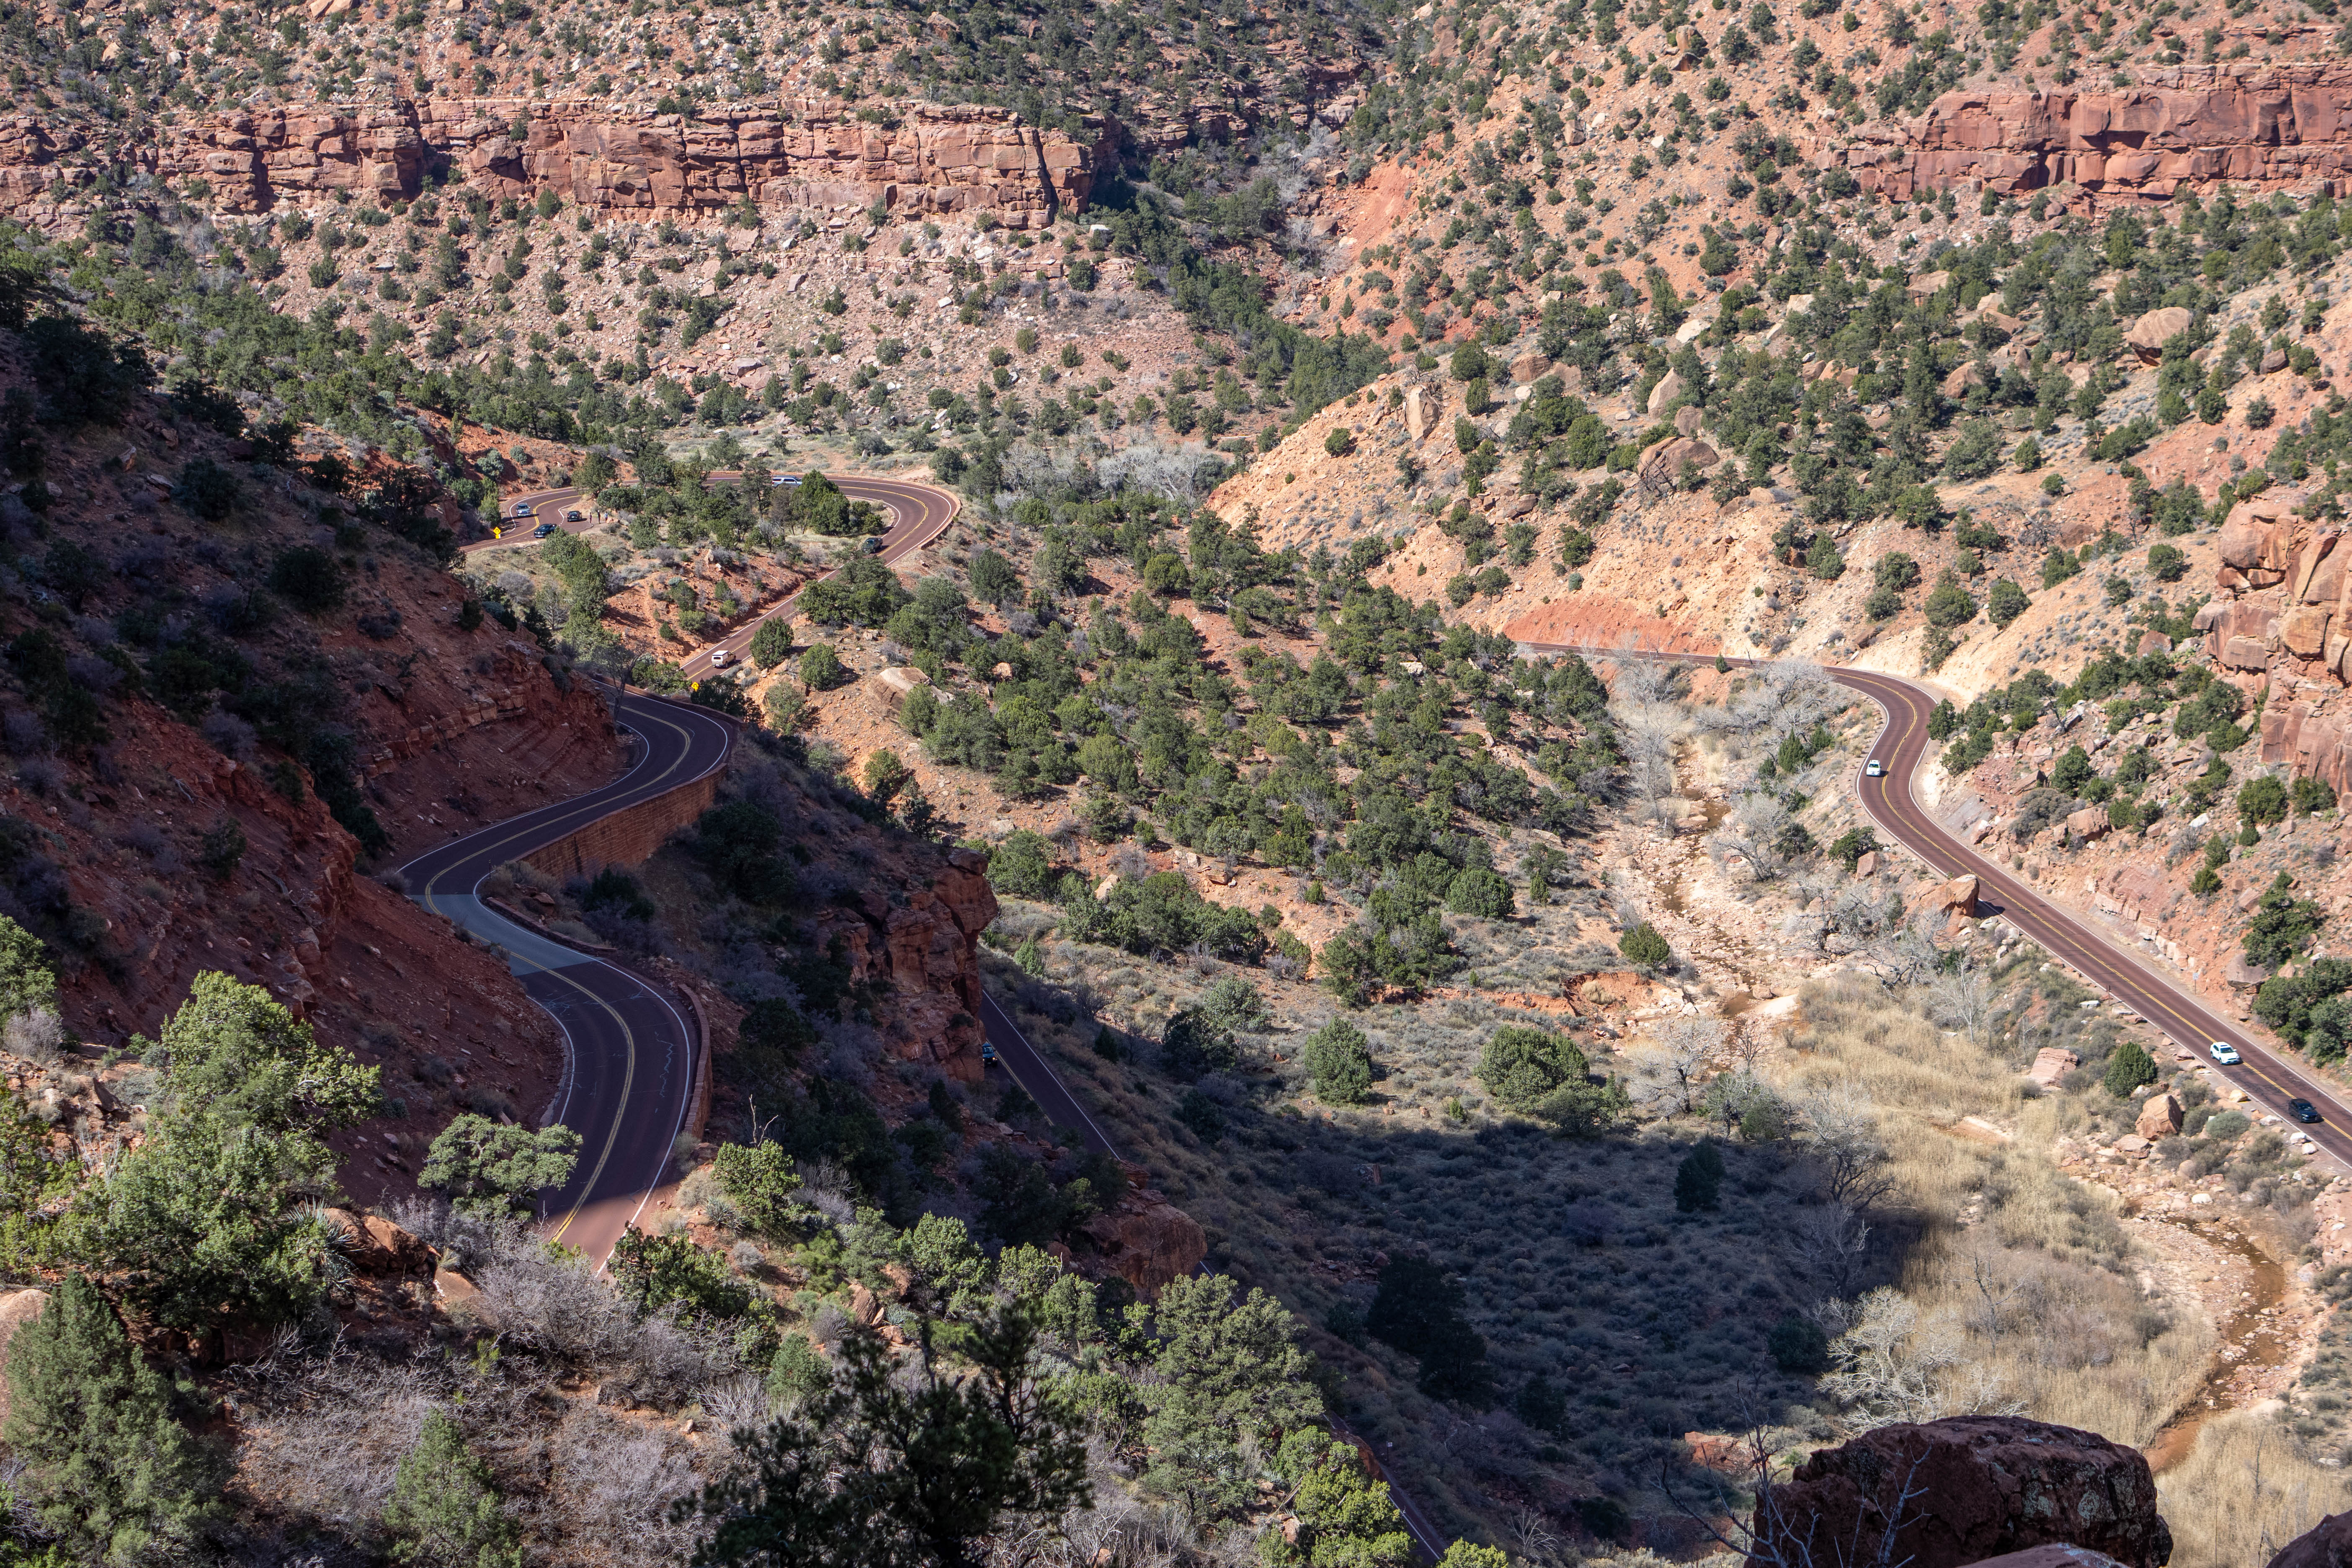 The winding road of Zion Mt. Carmel HIghway against red sandstone cliffs and trees